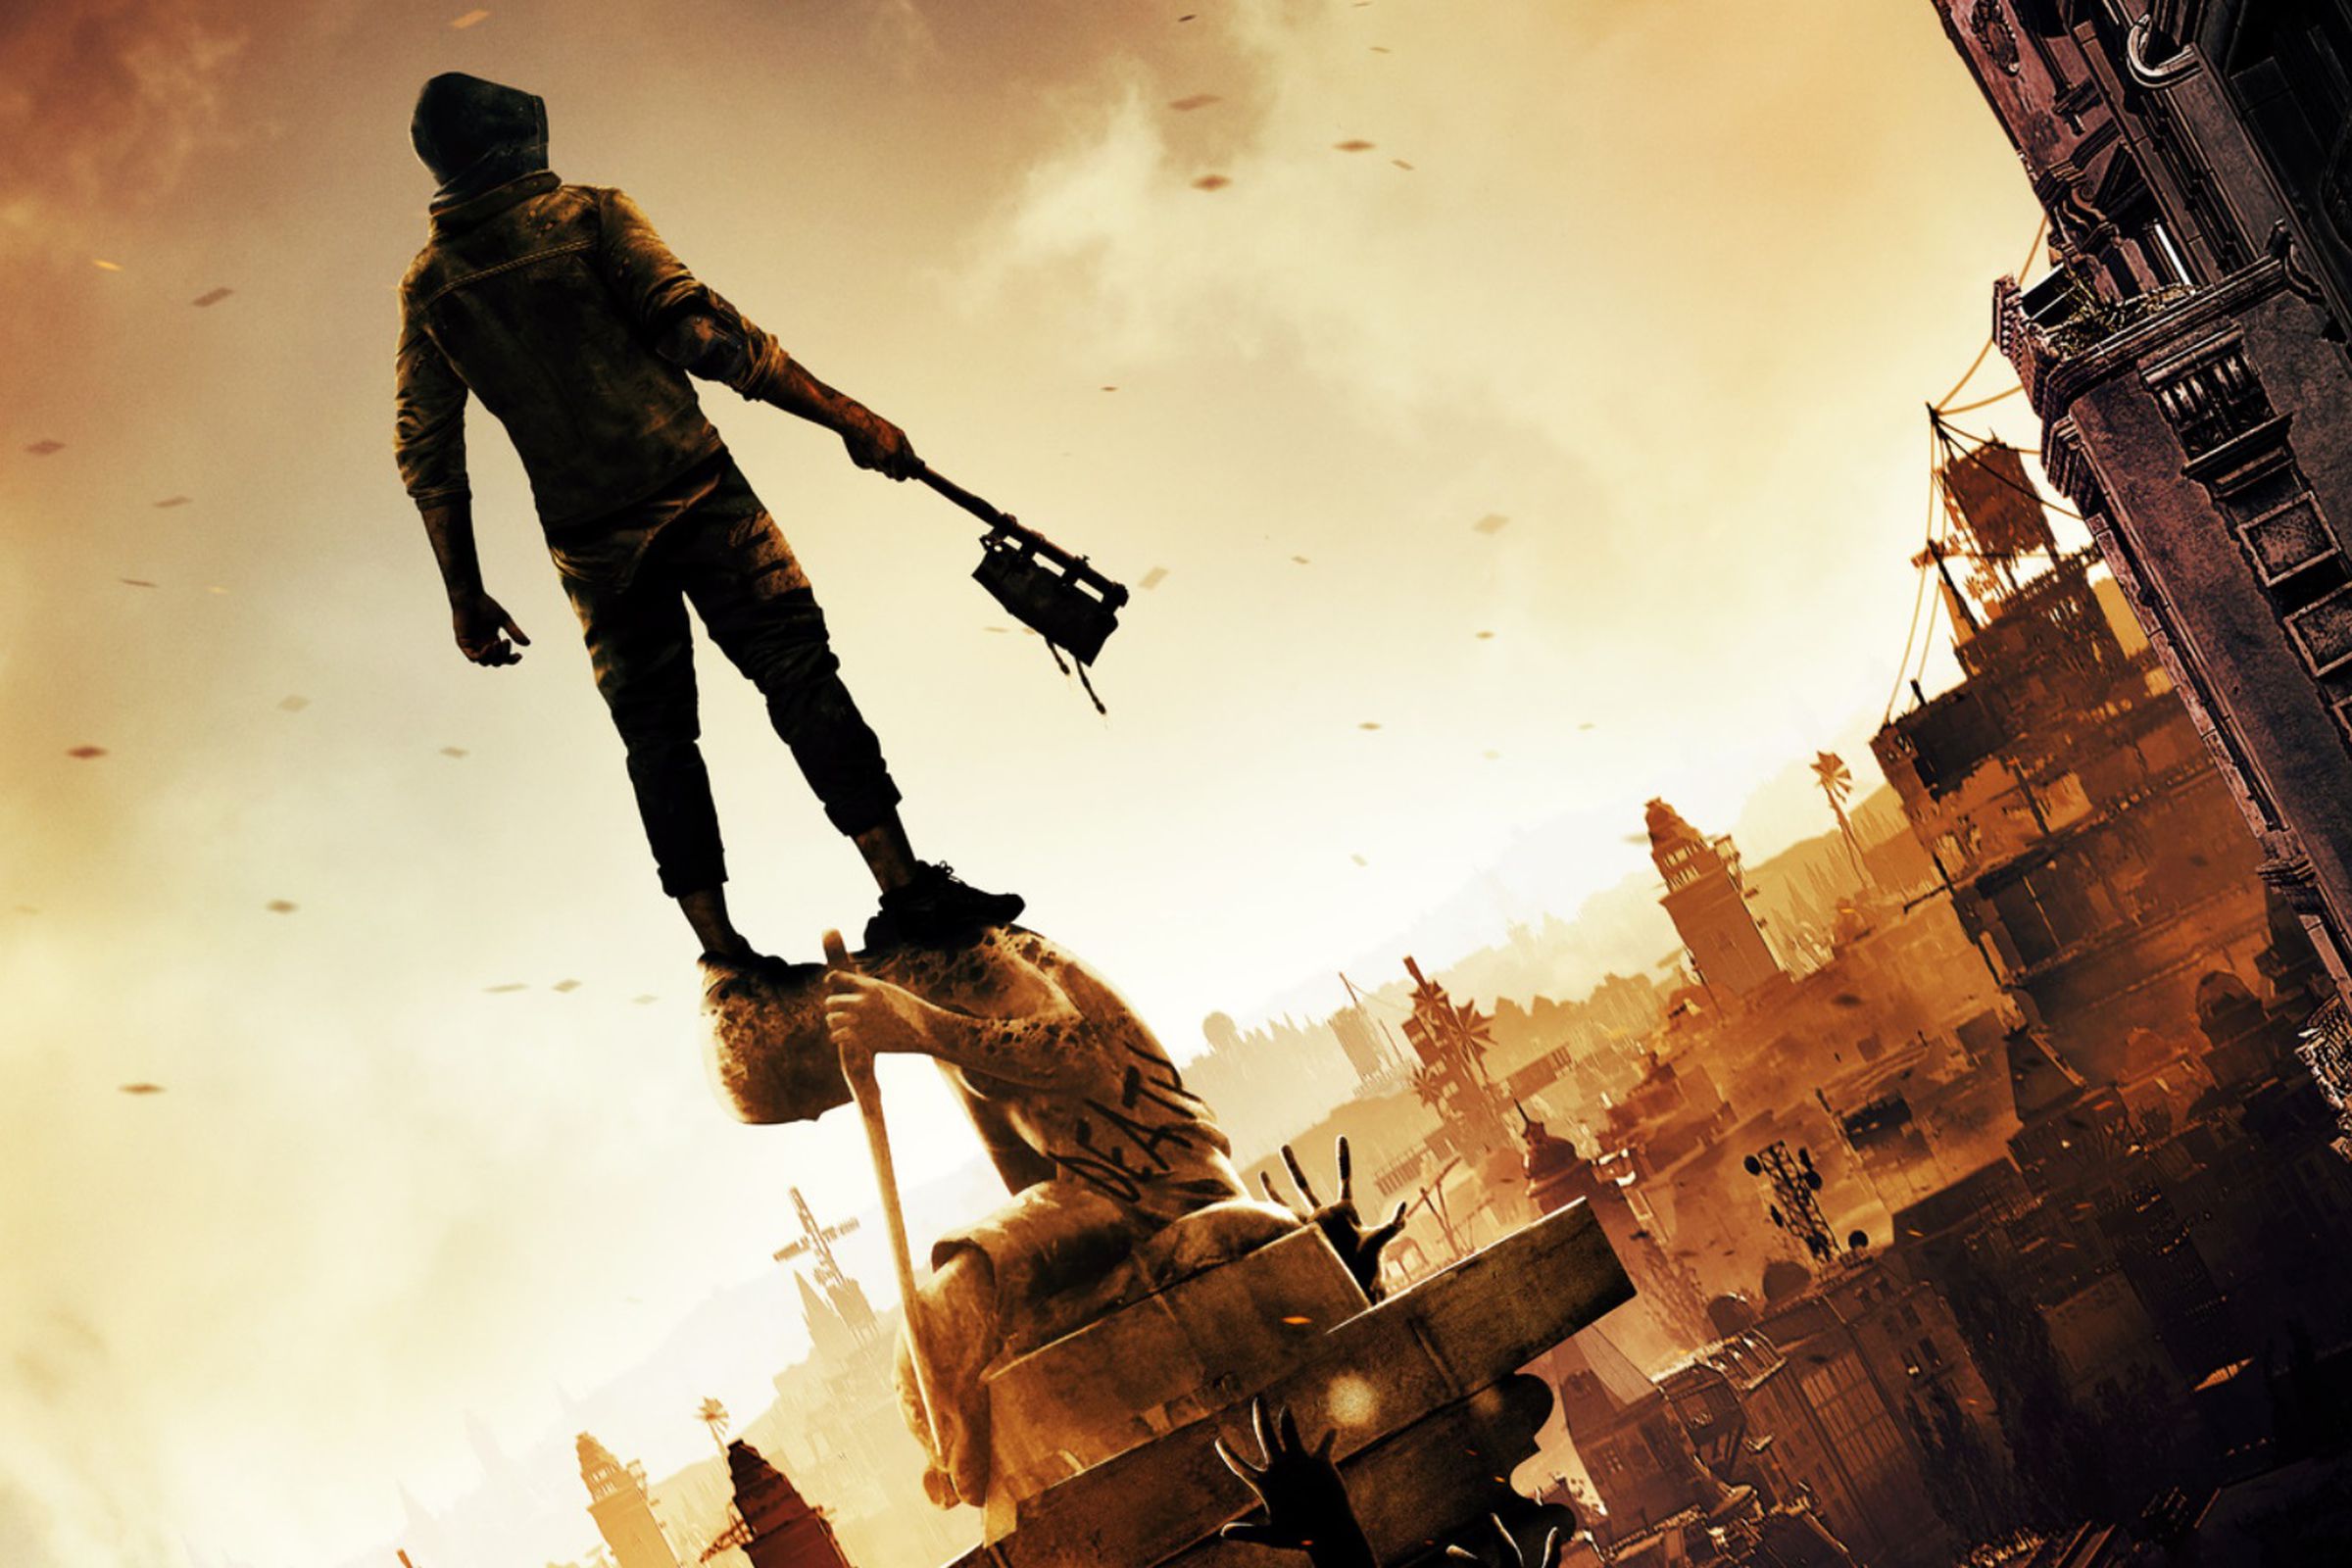 Key art from Dying Light 2 featuring a person silhouetted against a yellow sky holding an improvised axe weapon.